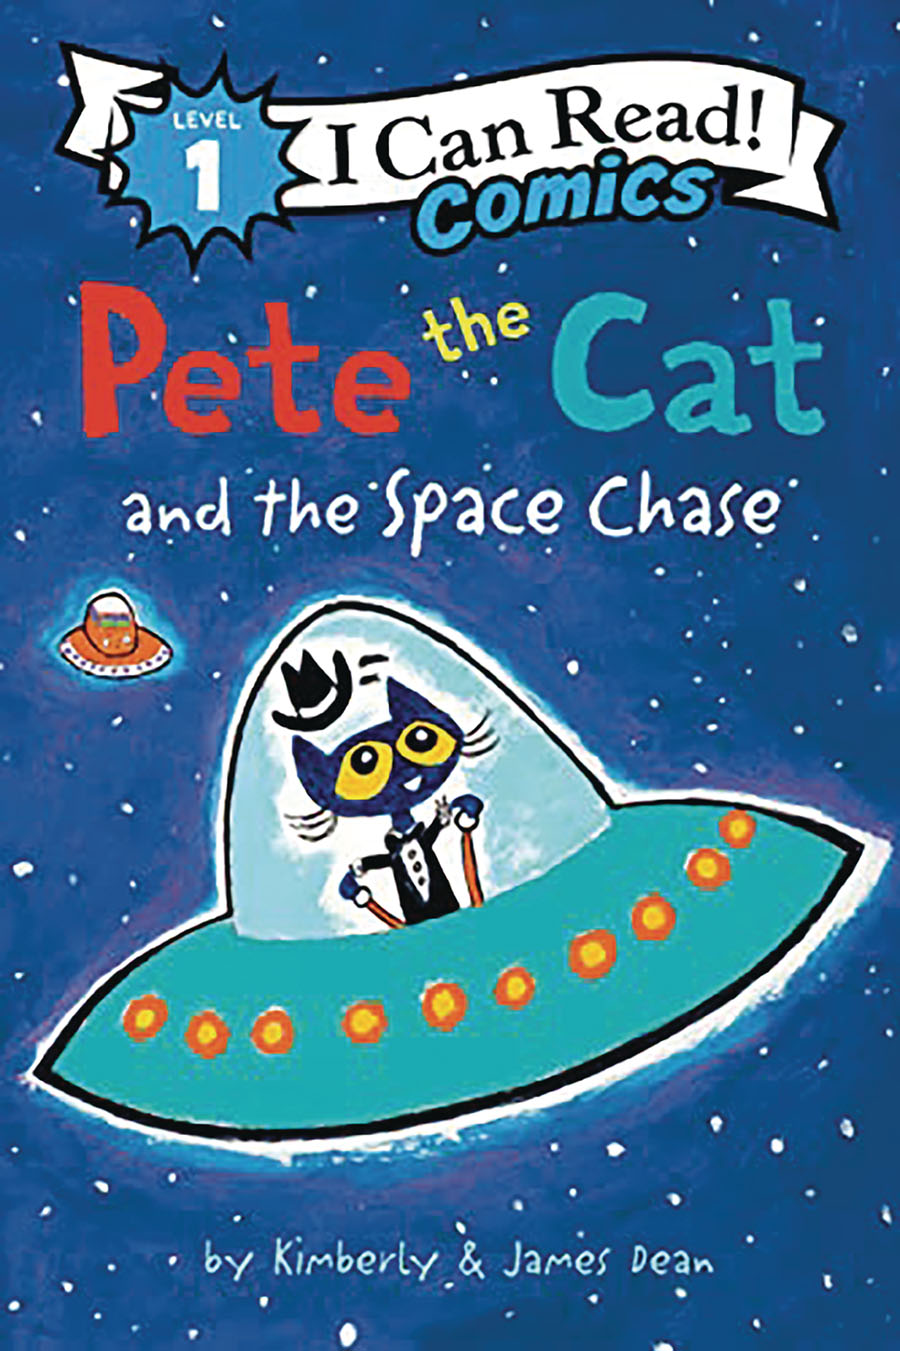 I Can Read Comics Level 1 Pete The Cat And The Space Chase TP